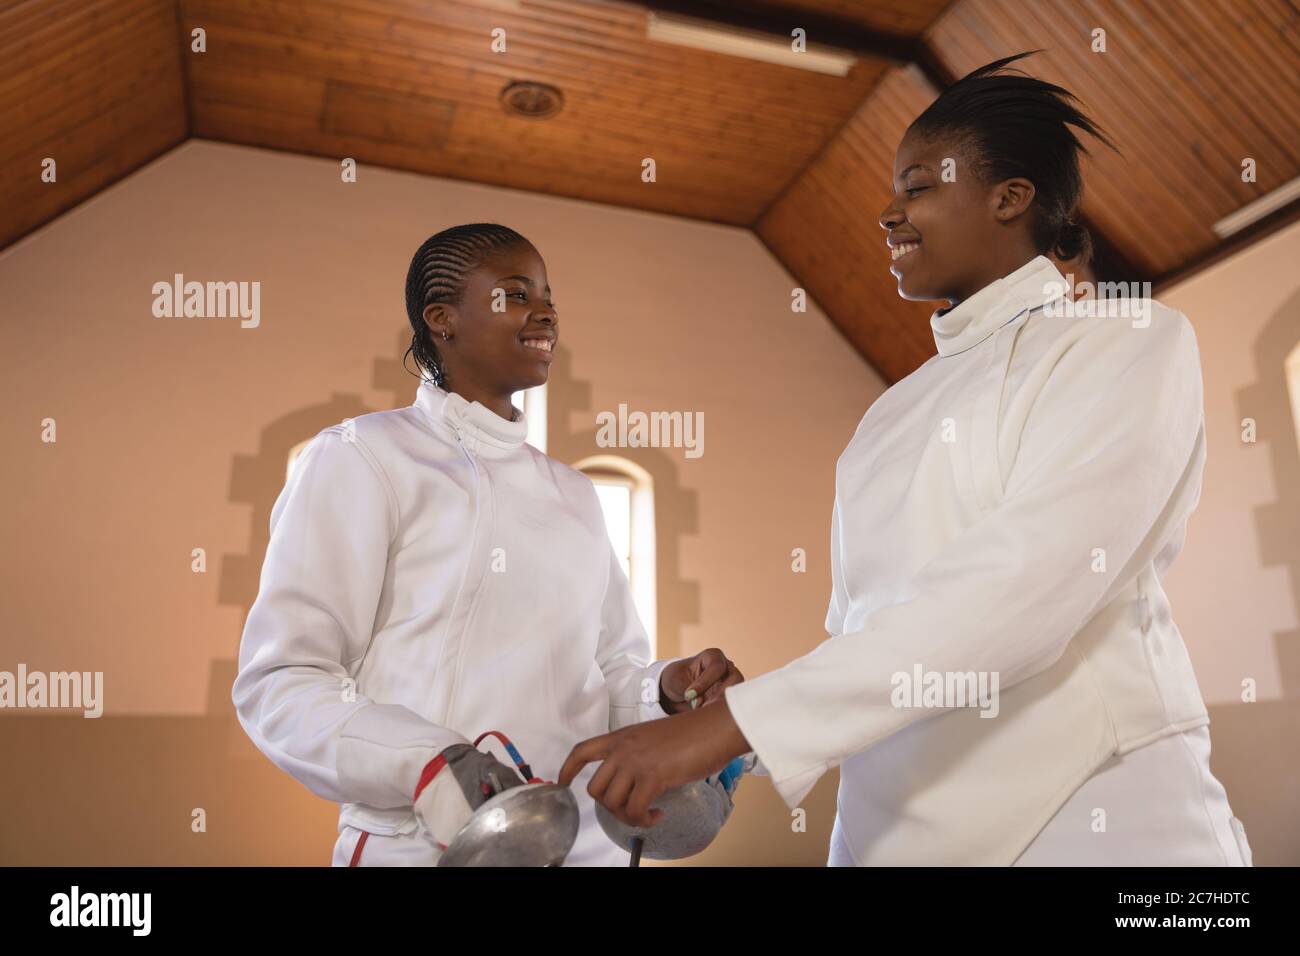 Two female fencers looking at each other Stock Photo